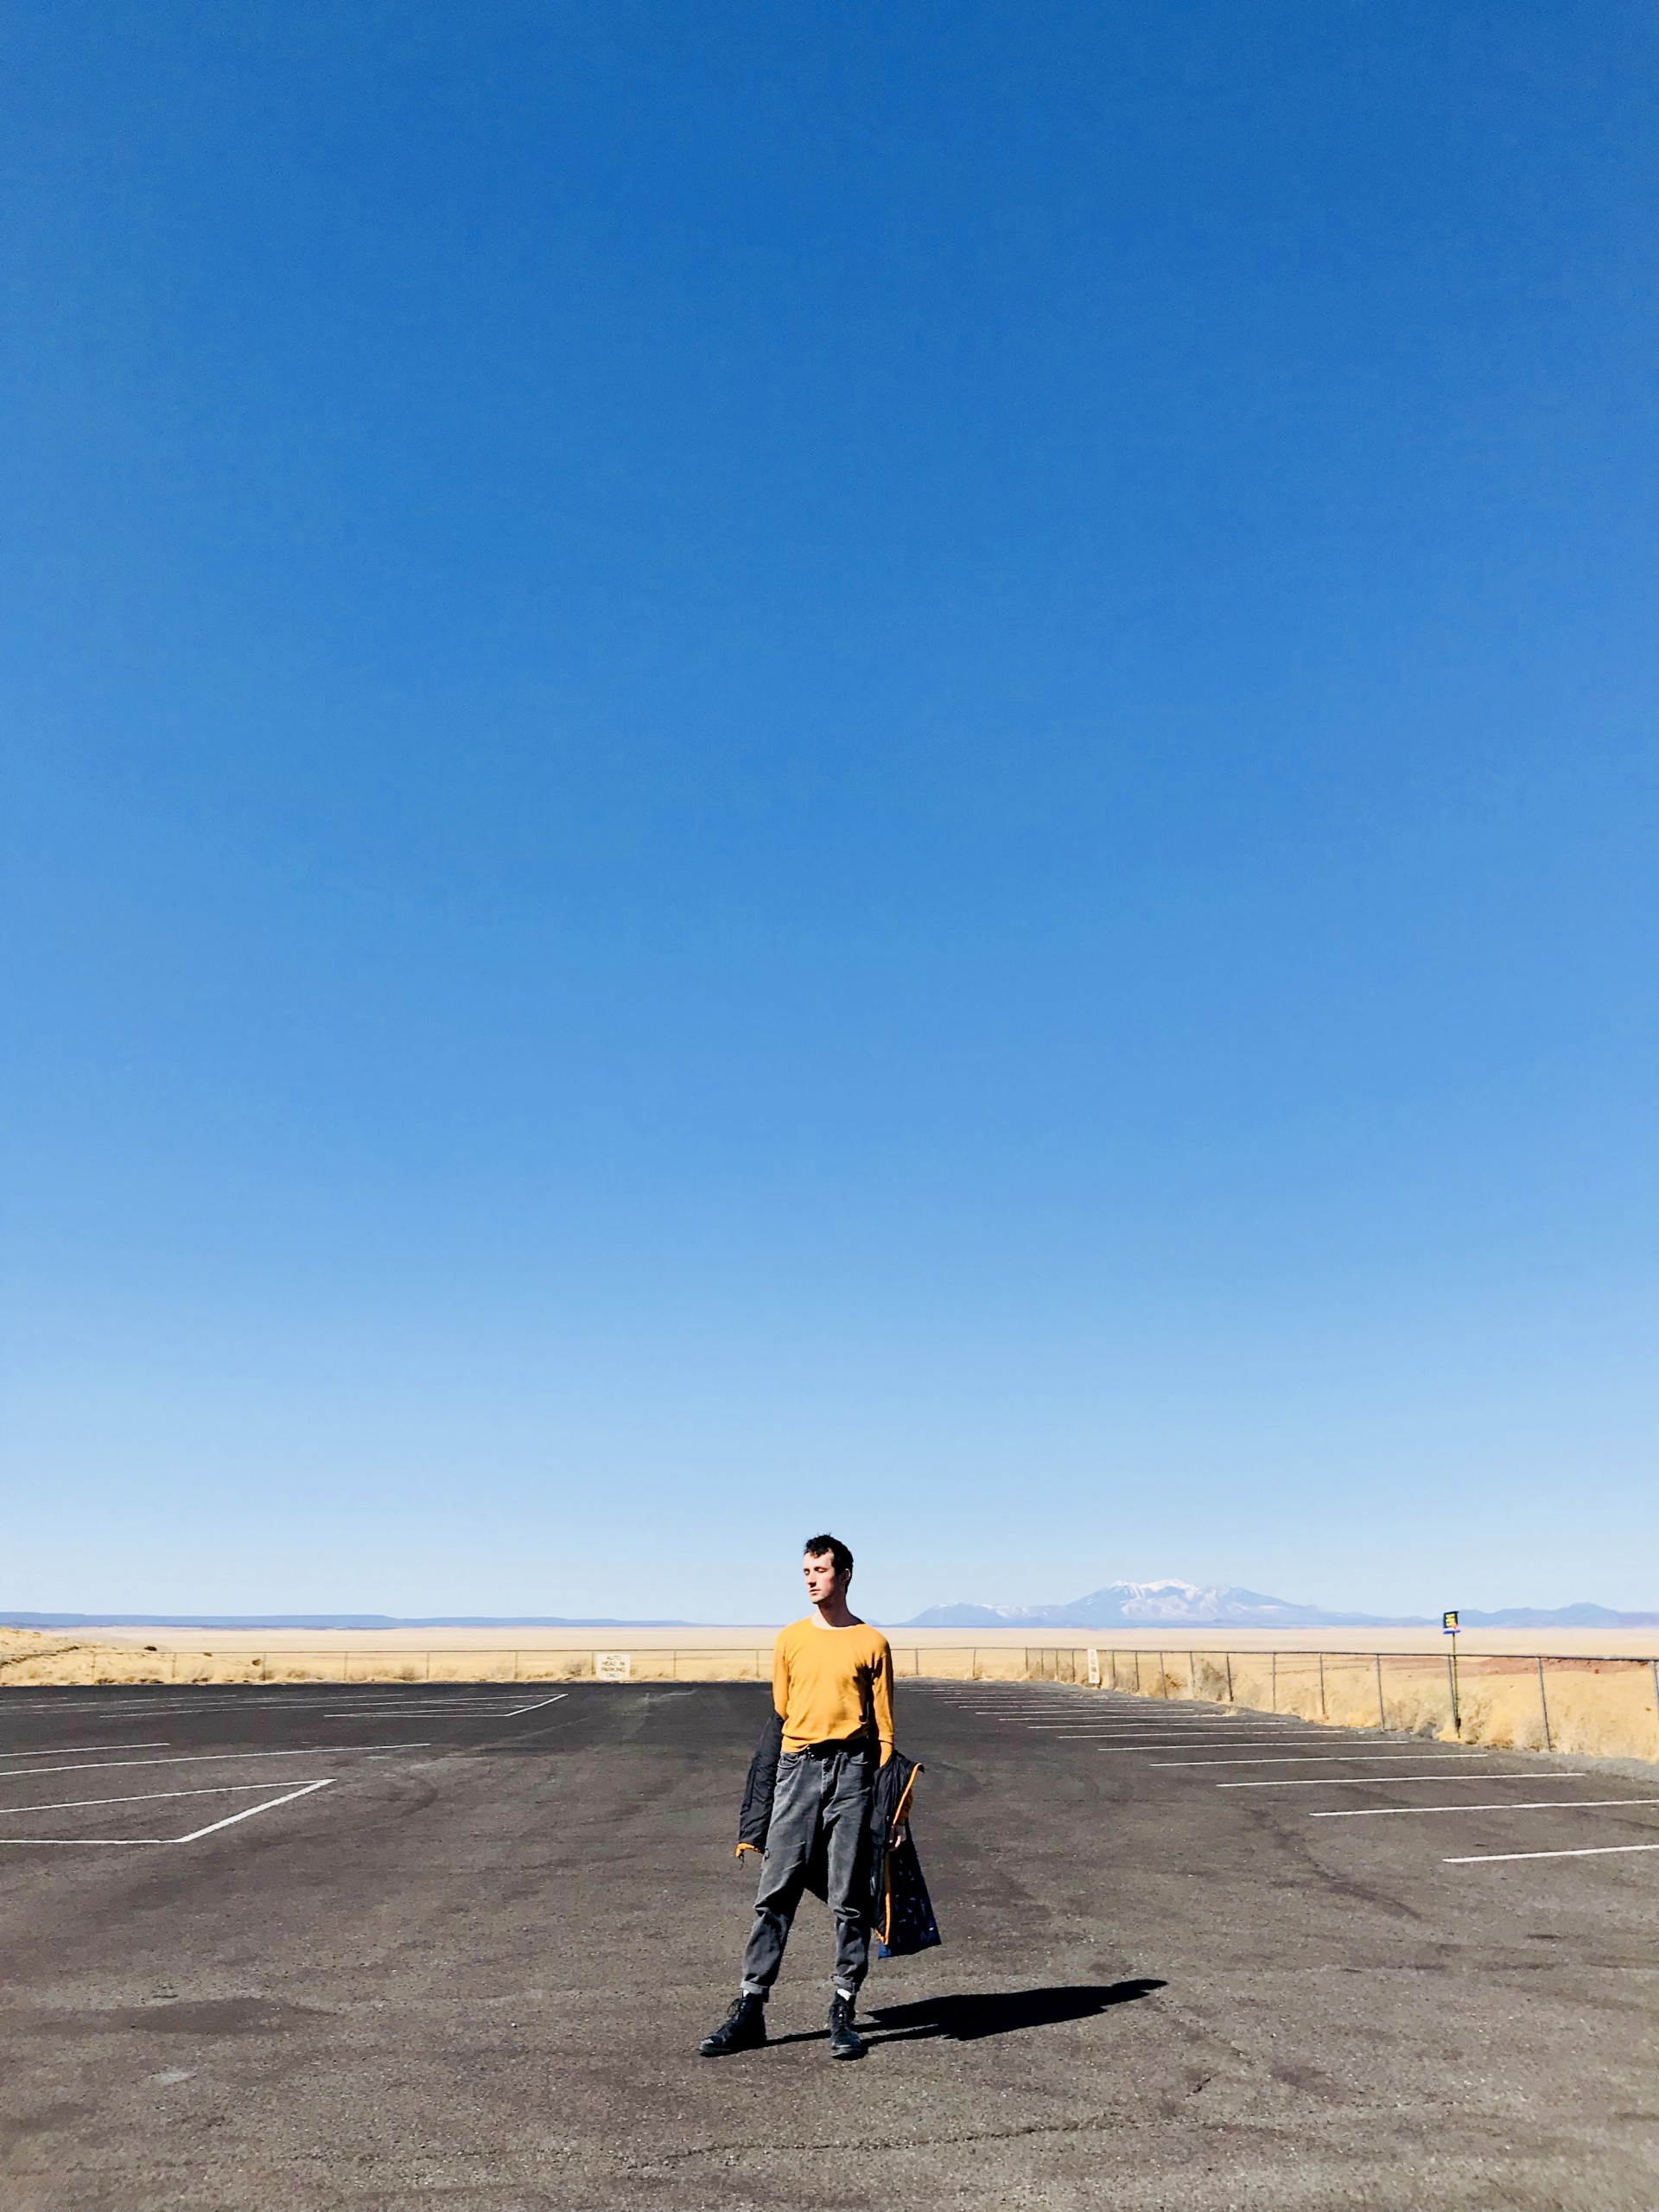 Male model standing in empty parking lot. 3/4 photograph is blue sky. Model has jacket half hanging off arms. 